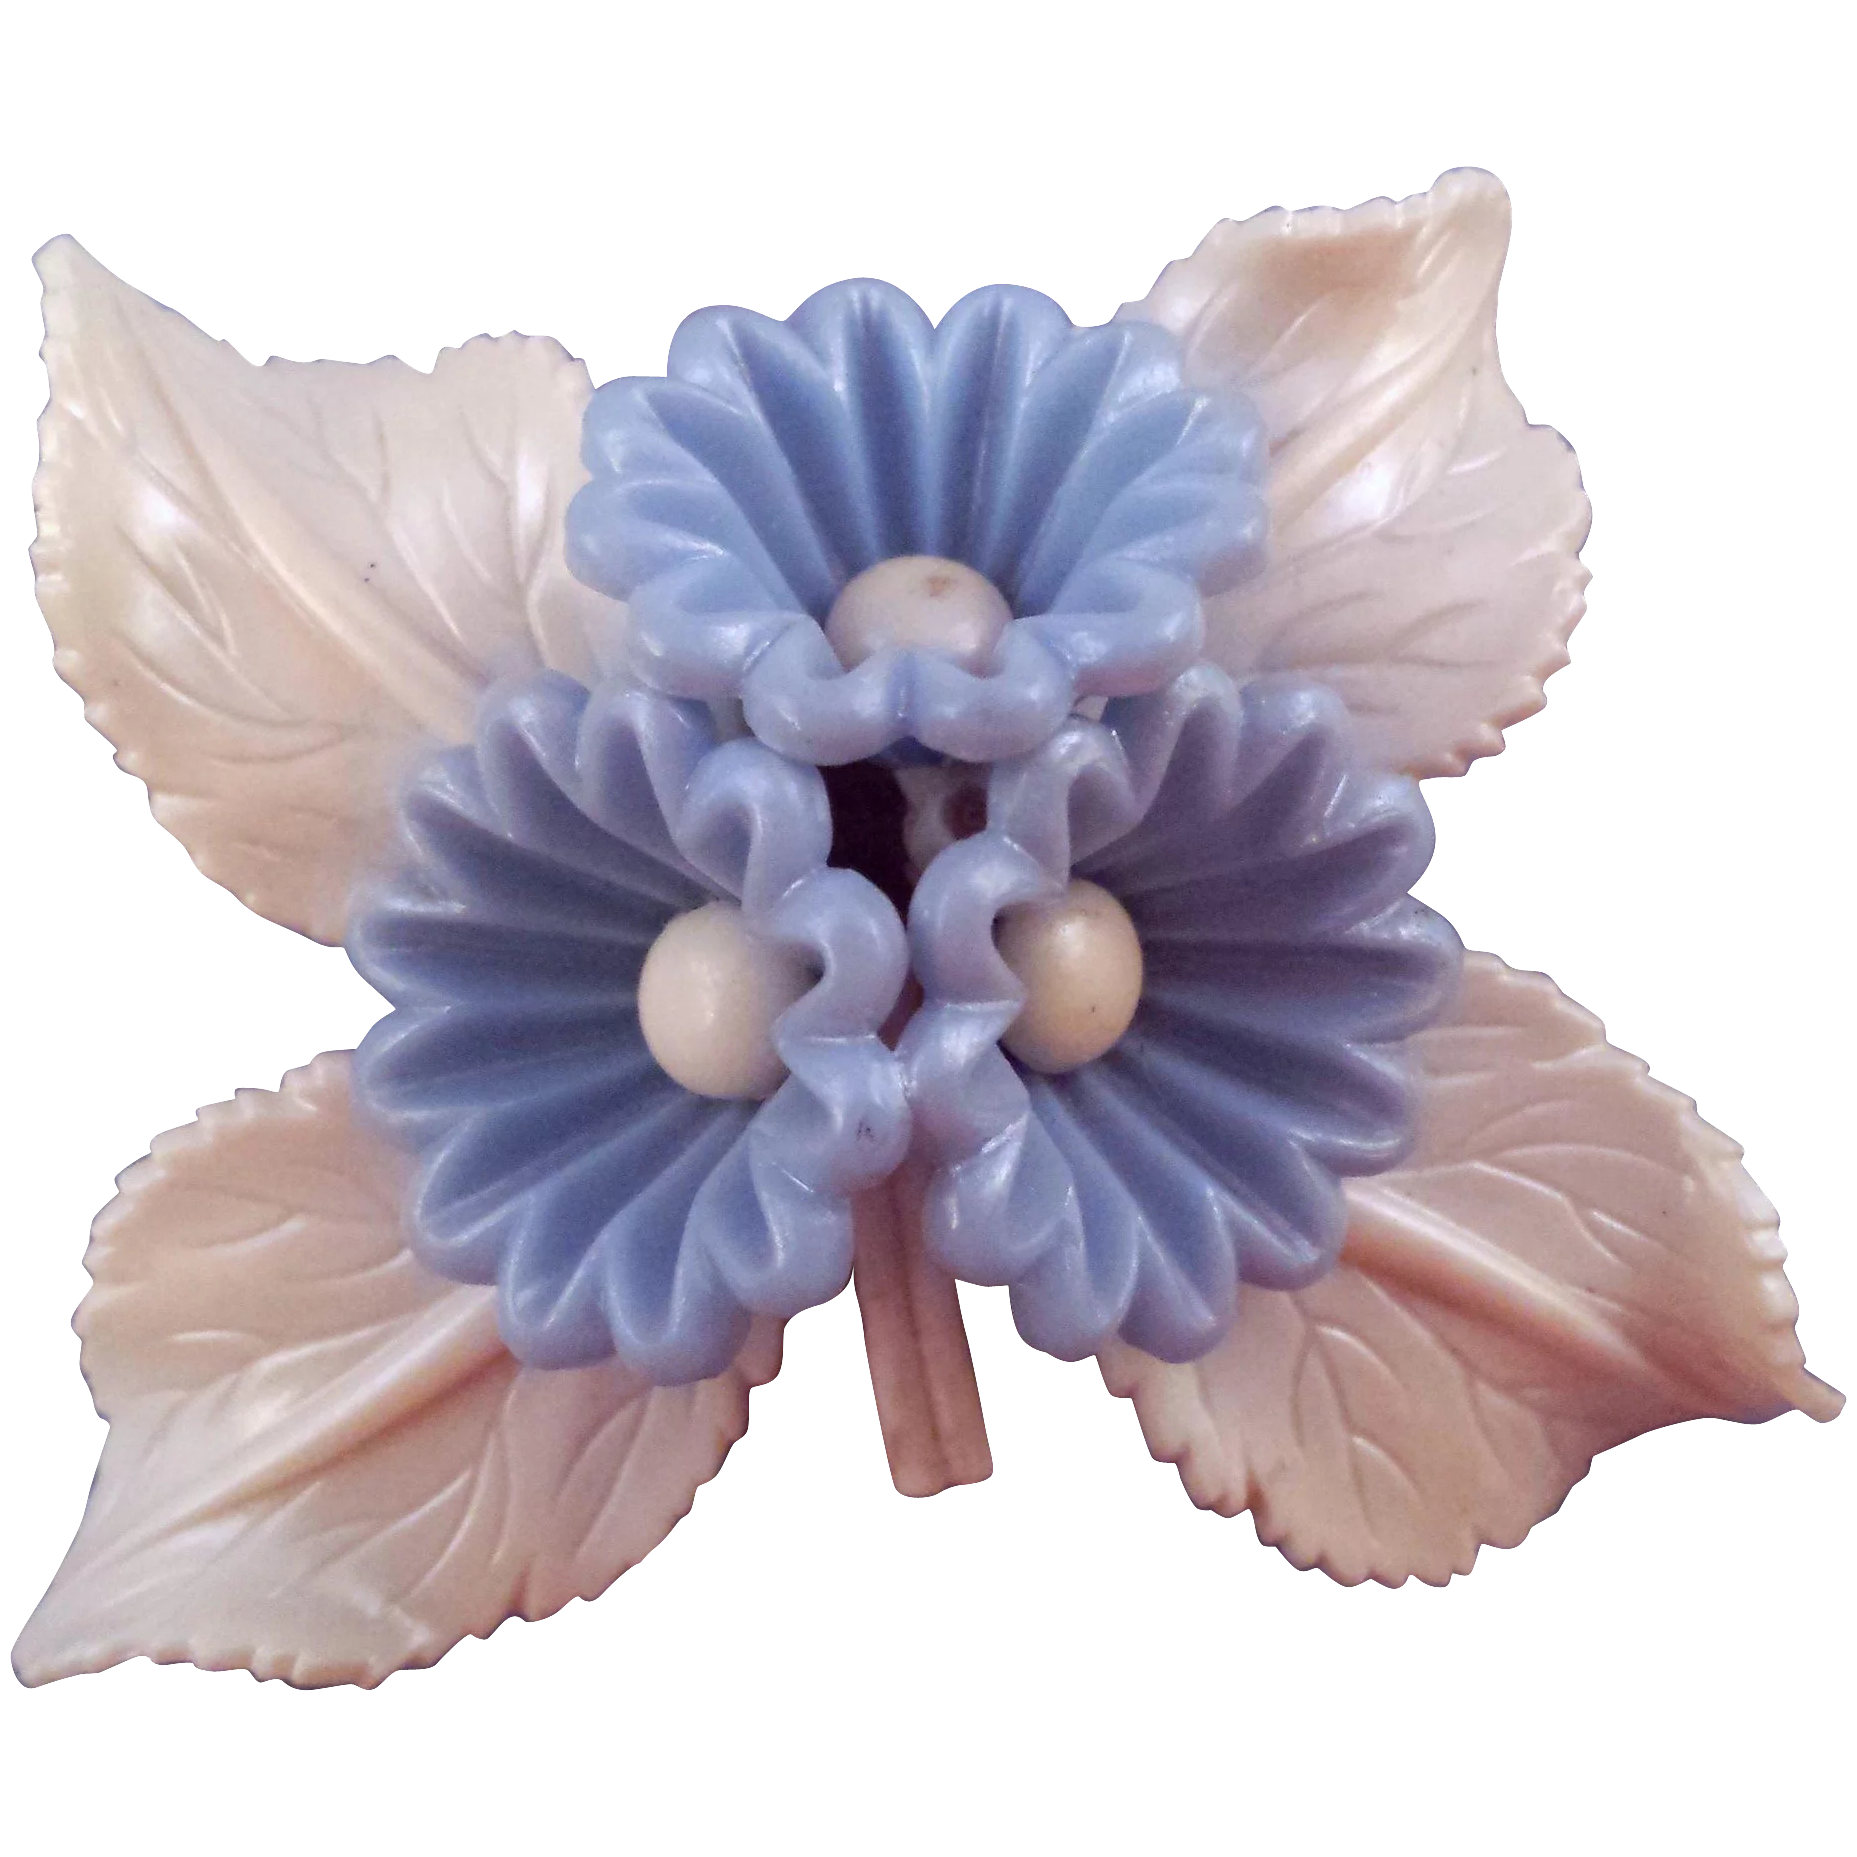 1940s Bluebell Plastic Flower Pin with Cream Colored Leaves